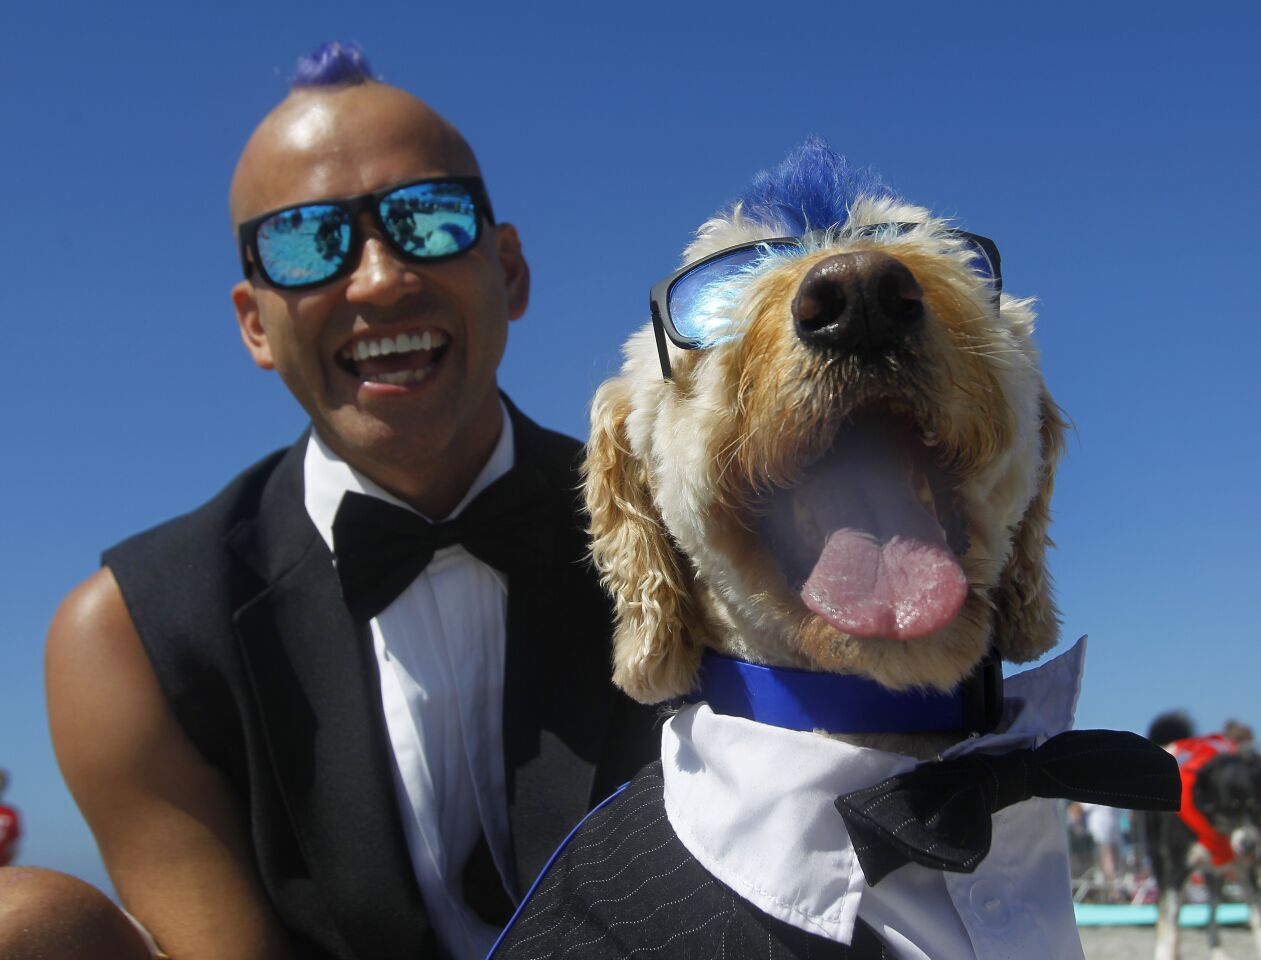 Kentucky Gallahue and his dog Derby get ready to compete in the freestyle division of the Helen Woodward Animal Center's 16th annual Surf Dog Surf-A-Thon.